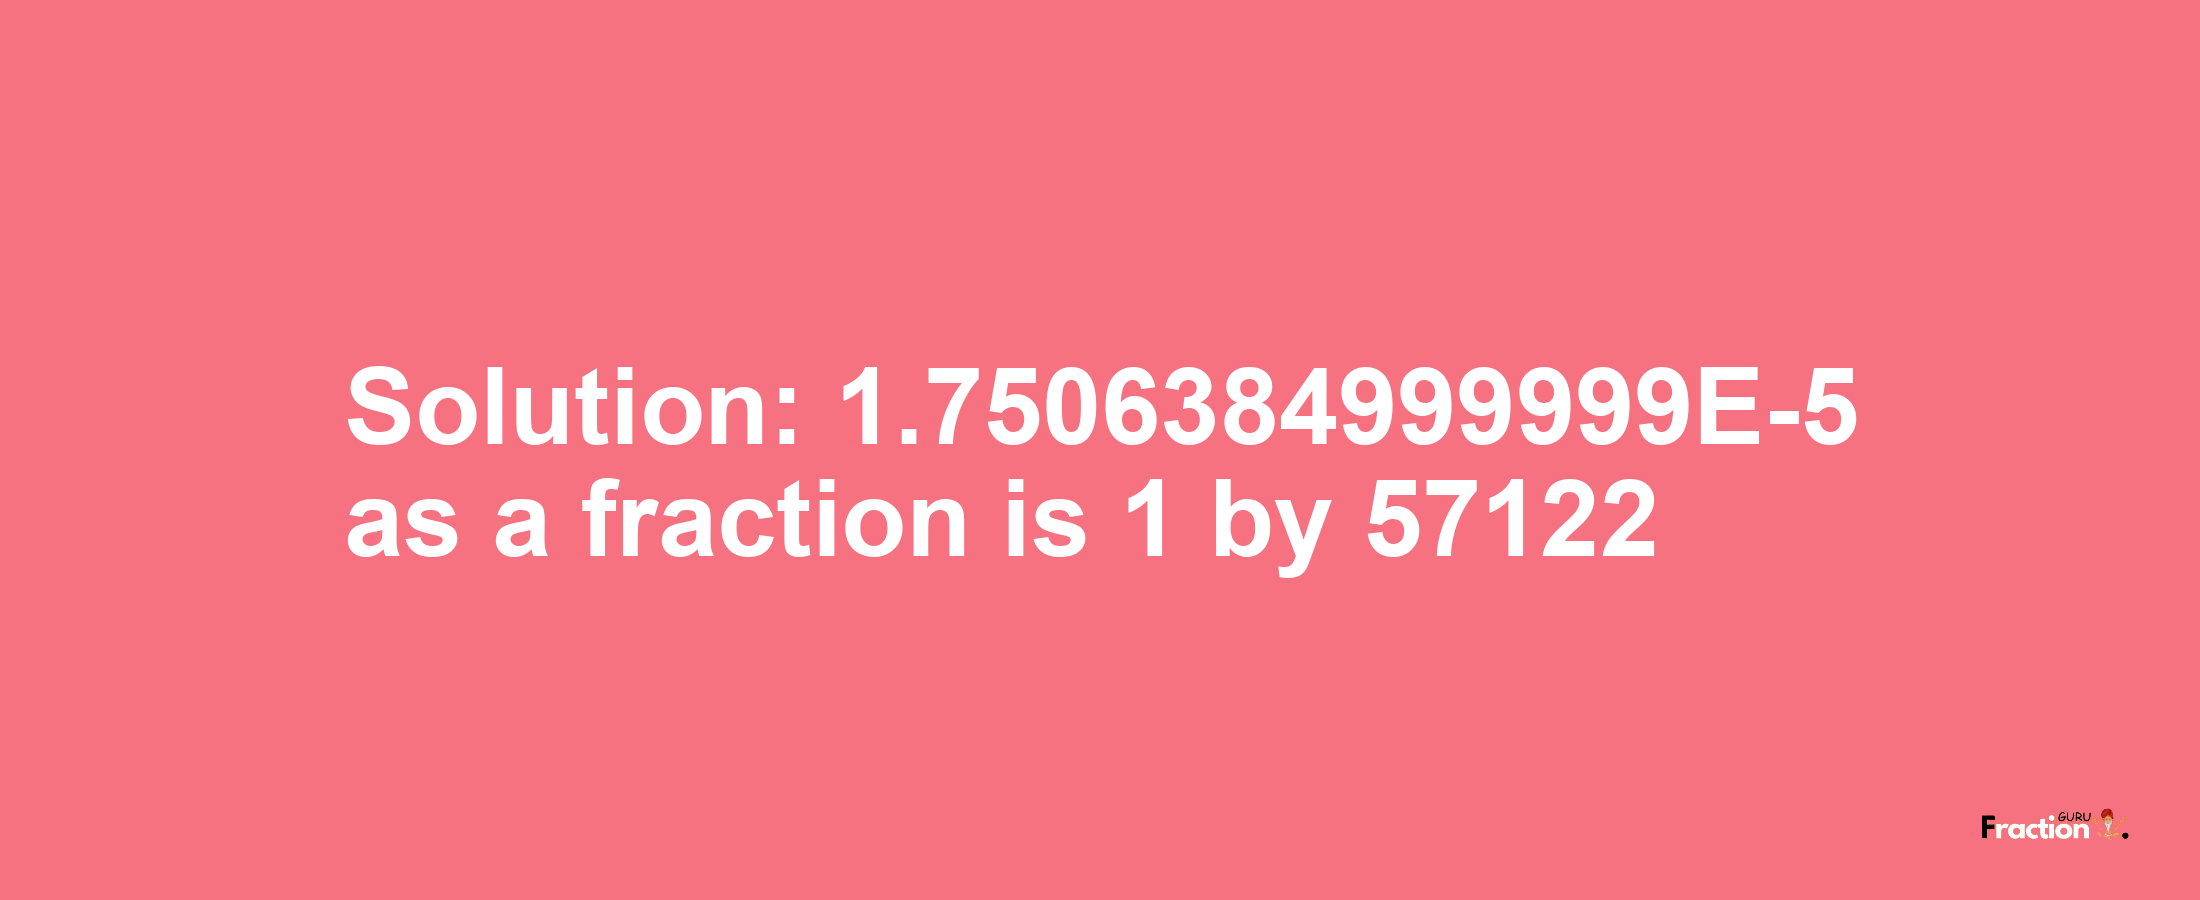 Solution:1.7506384999999E-5 as a fraction is 1/57122